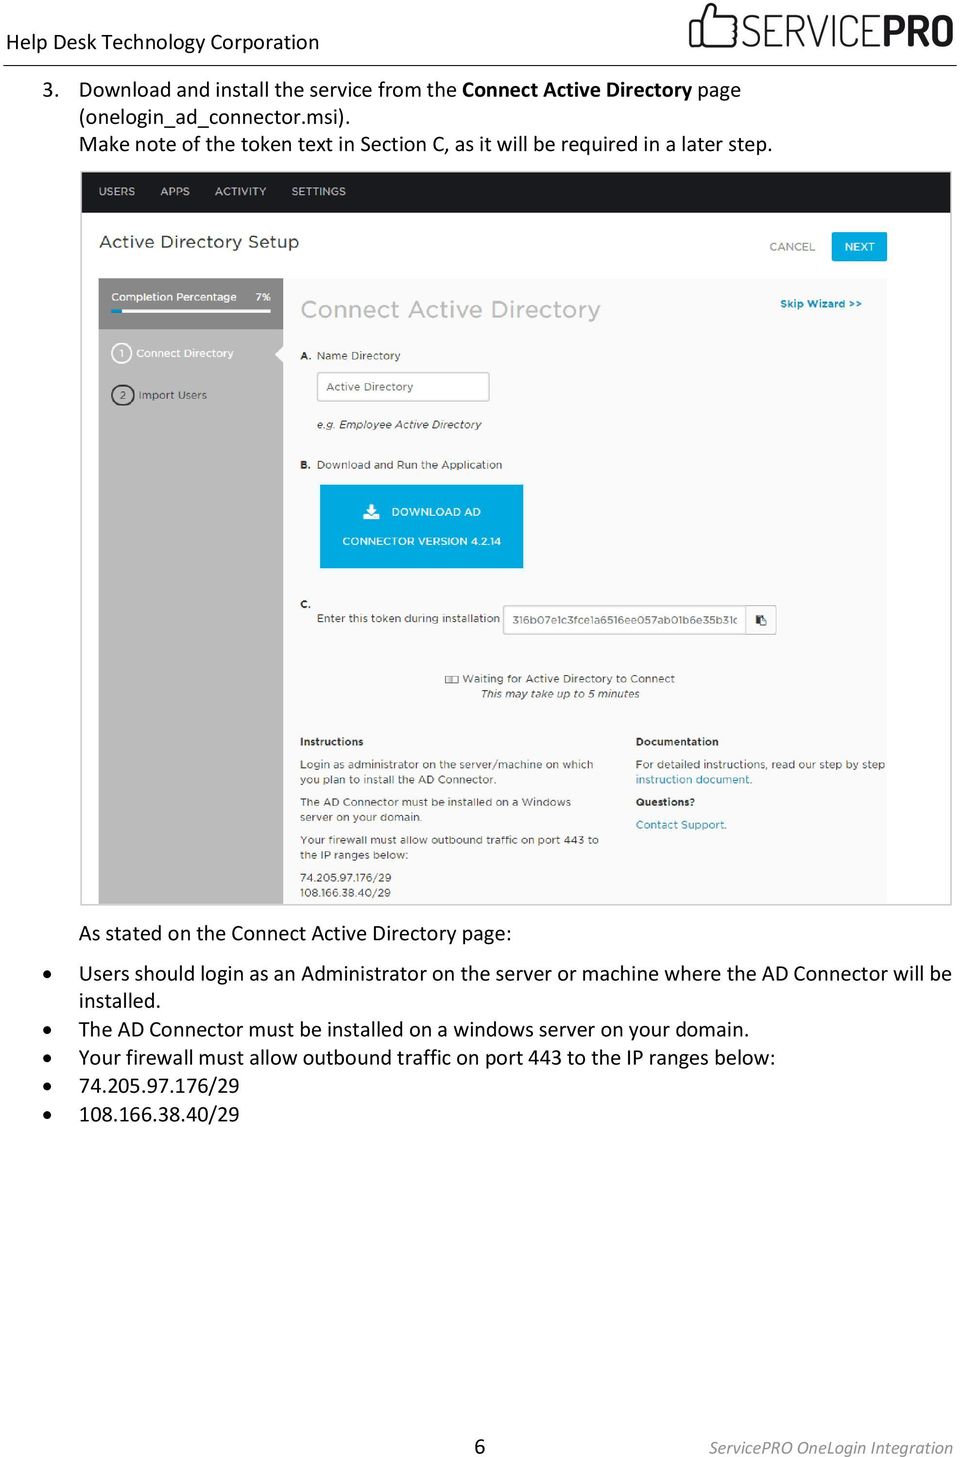 As stated on the Connect Active Directory page: Users should login as an Administrator on the server or machine where the AD Connector